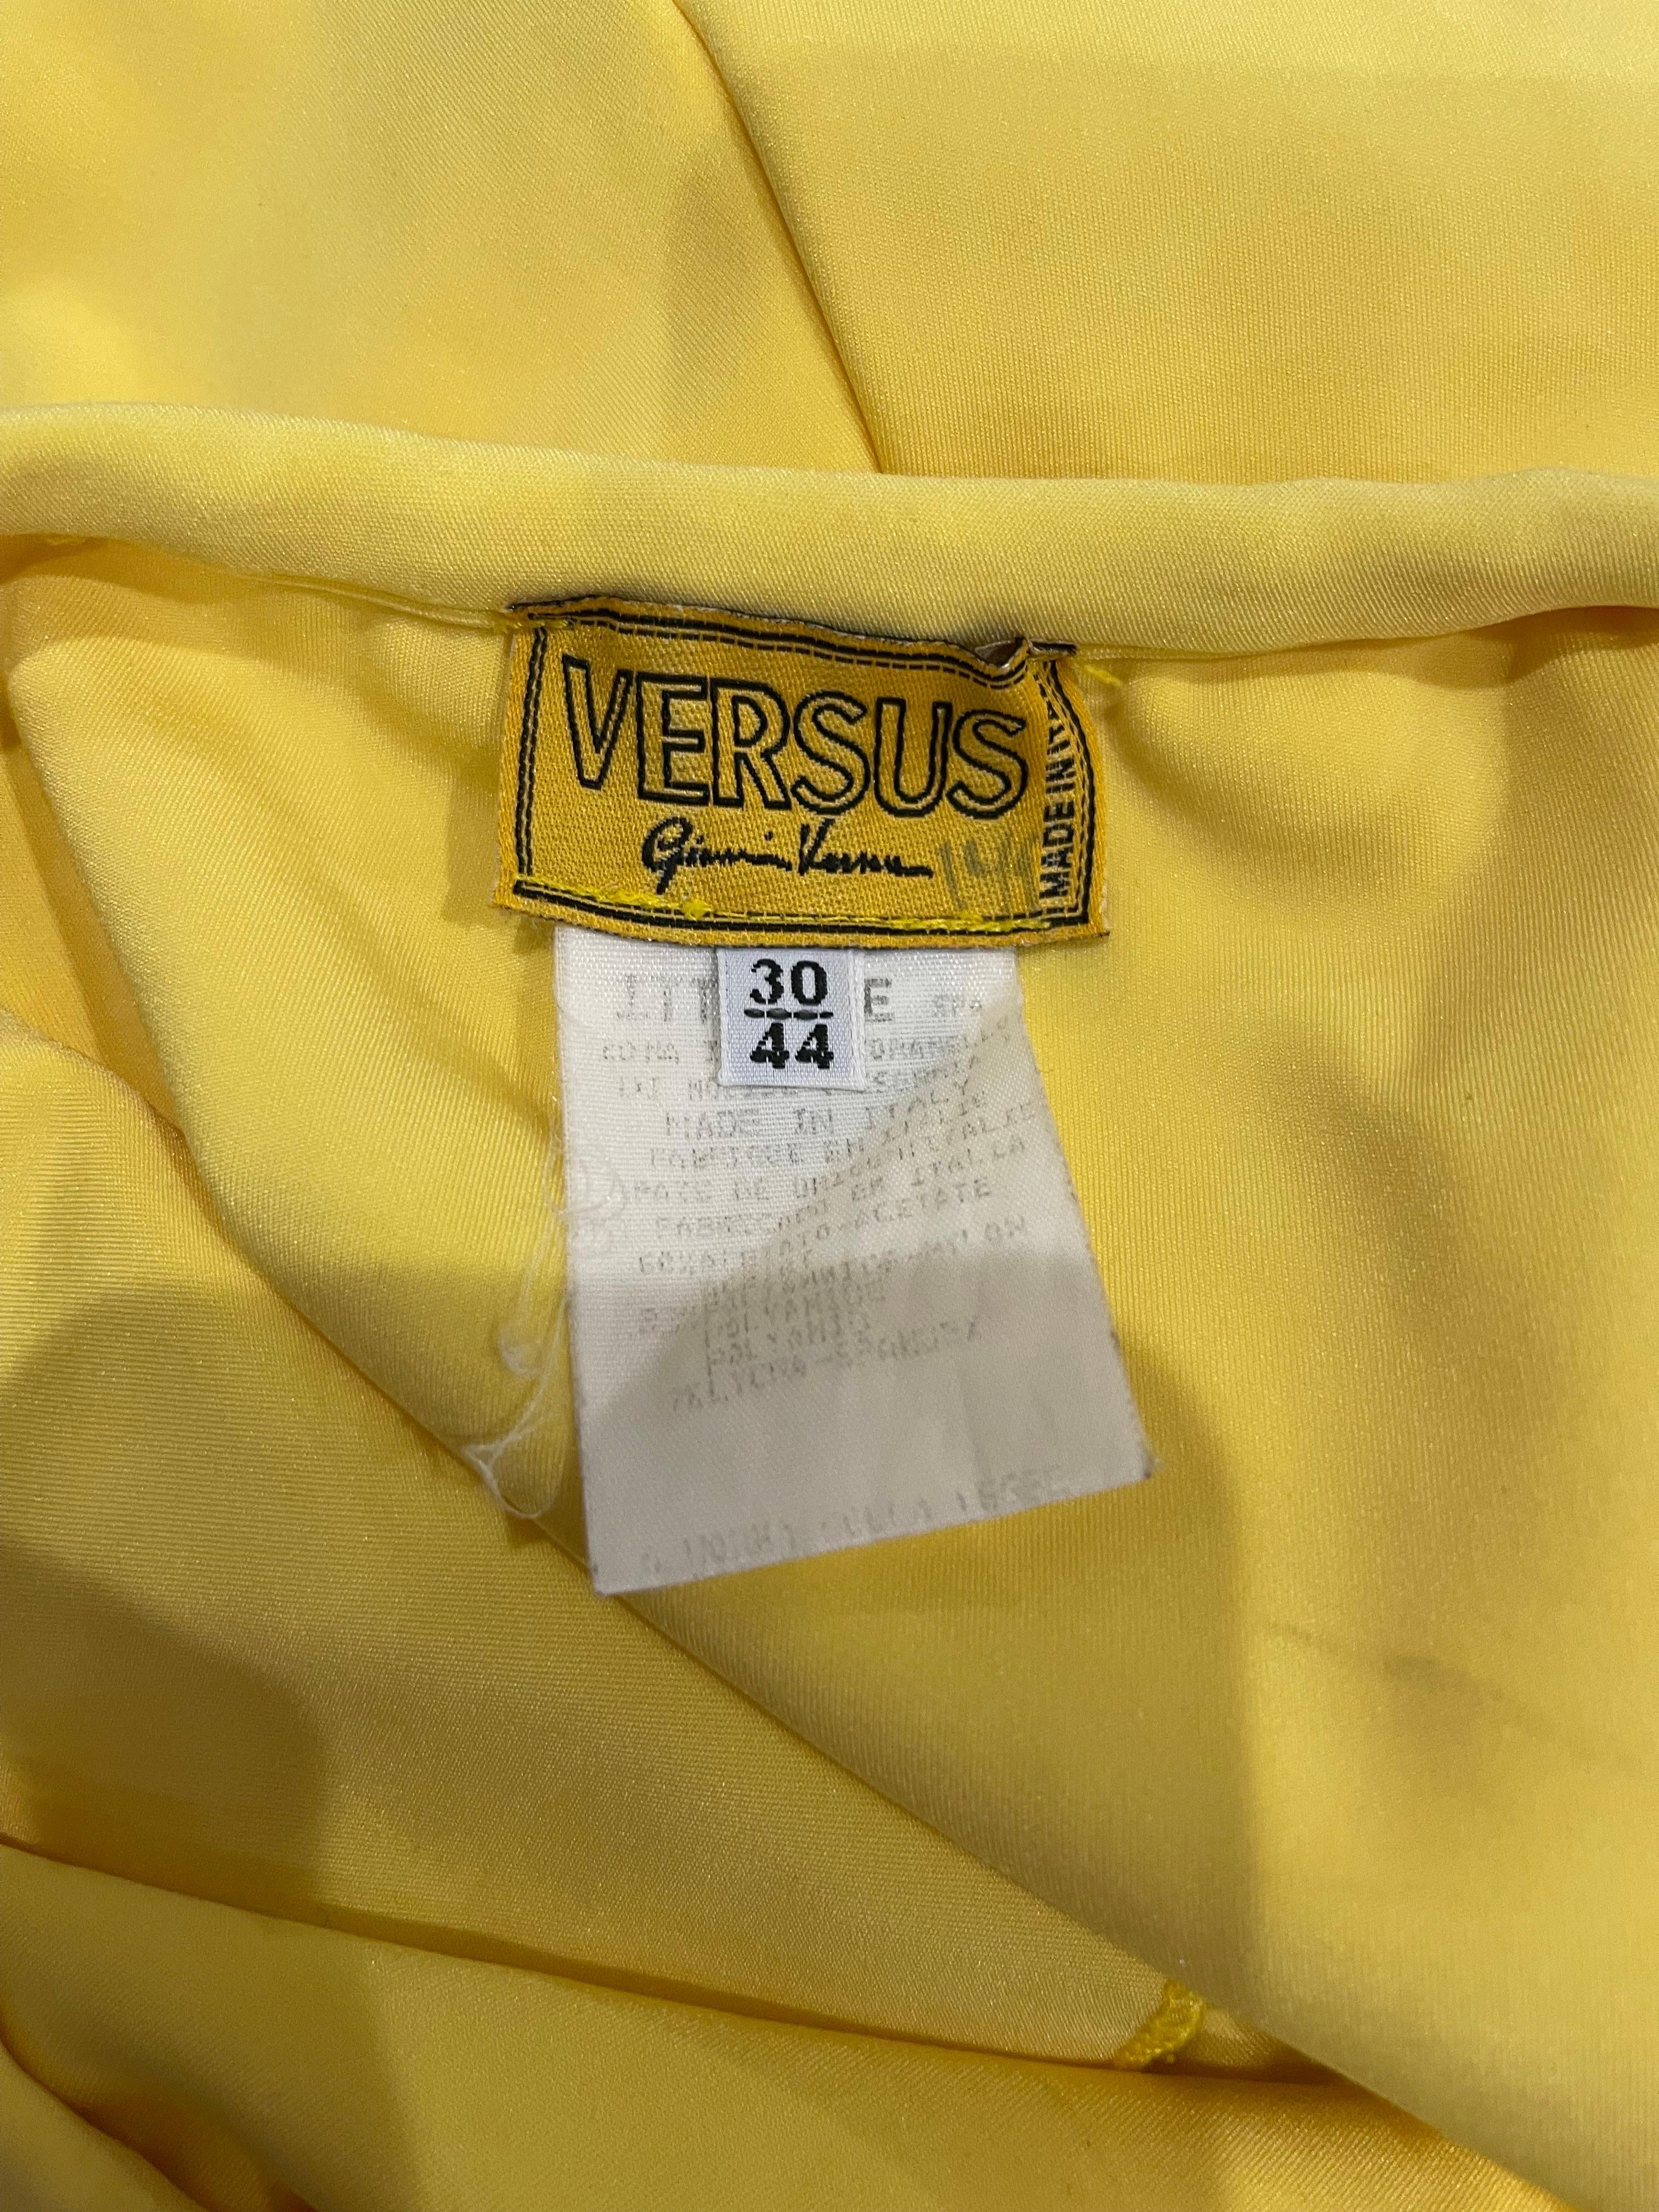 Sexy 1990s VERSUS, by GIANNI VERSACE canary yellow bodycon acetate spandex blend strapless dress ! Features a cut-out directly above the bust. Hidden zipper up the back with hook-and-eye closure. Hugs the body in all the right places, and the